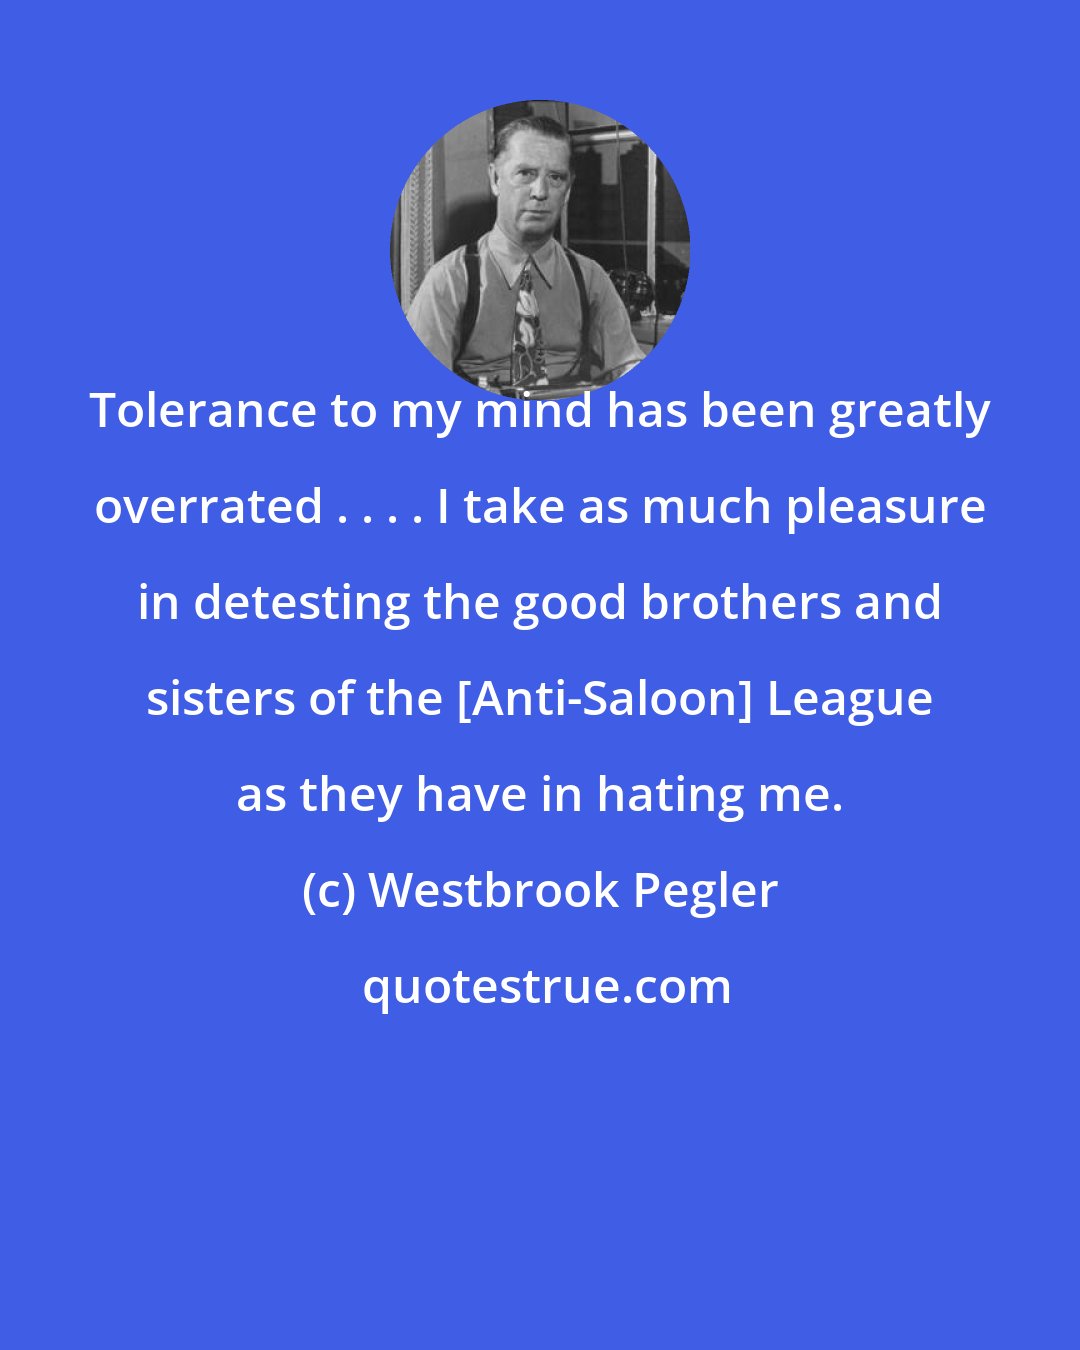 Westbrook Pegler: Tolerance to my mind has been greatly overrated . . . . I take as much pleasure in detesting the good brothers and sisters of the [Anti-Saloon] League as they have in hating me.